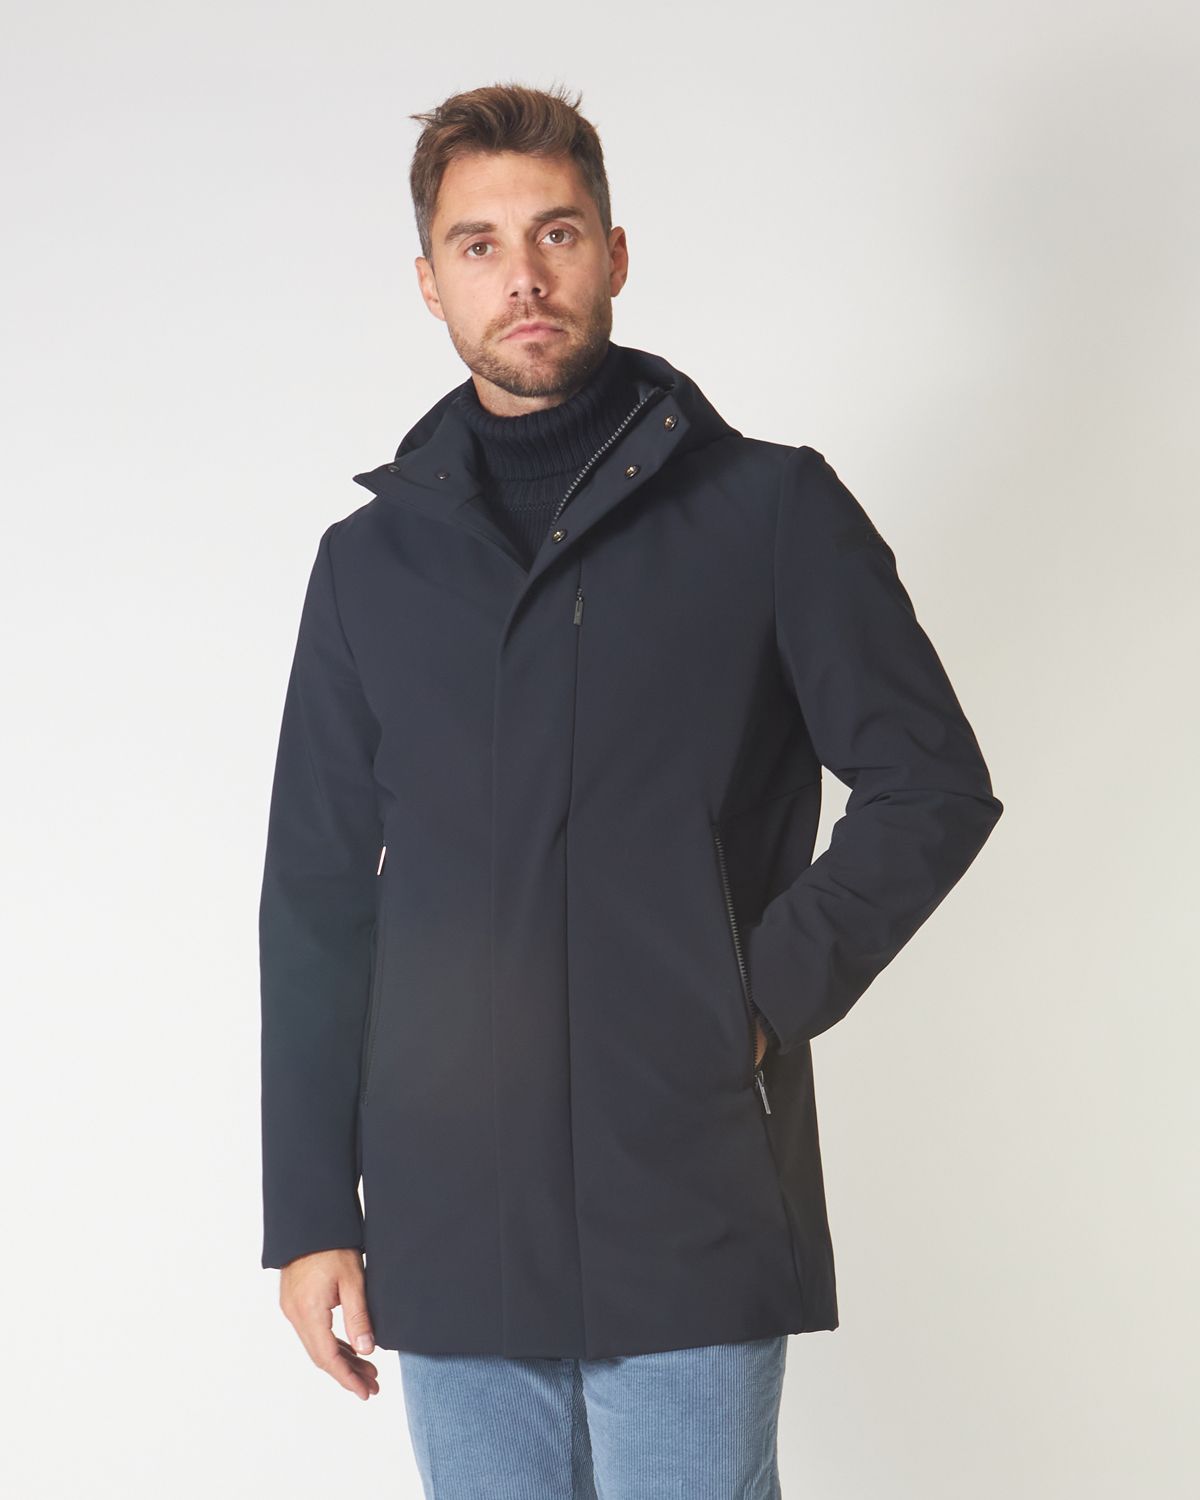 WINTER THERMO JACKET BLUE BLACK